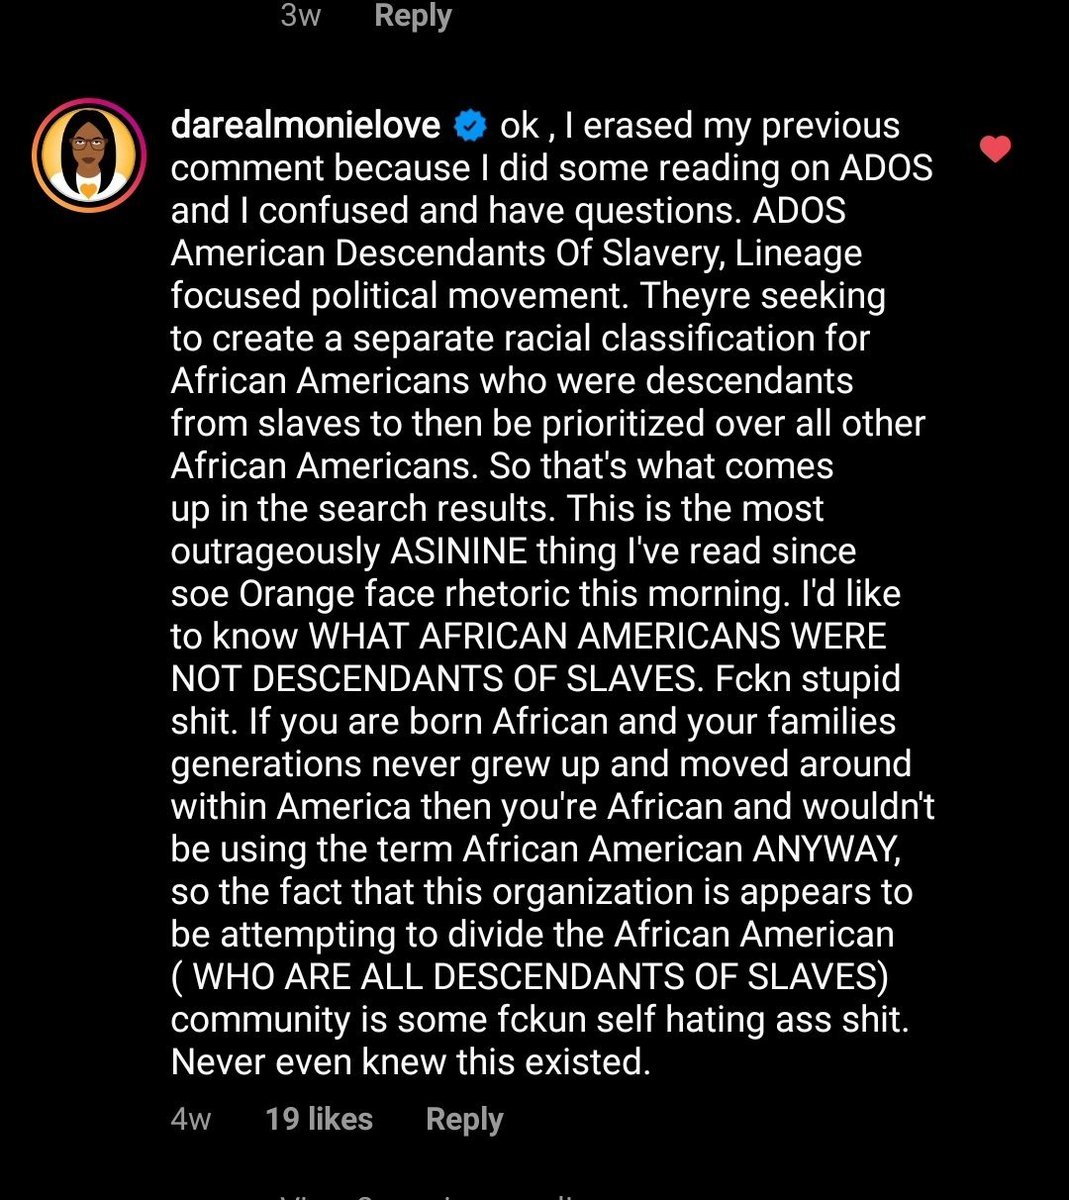 #22 Monie LoveUK Hip Hop ArtistShe recently became a Talib Kweli anti-Yvette/ADOS disciple after his recent smear of a female  #ADOS Senate candidate.